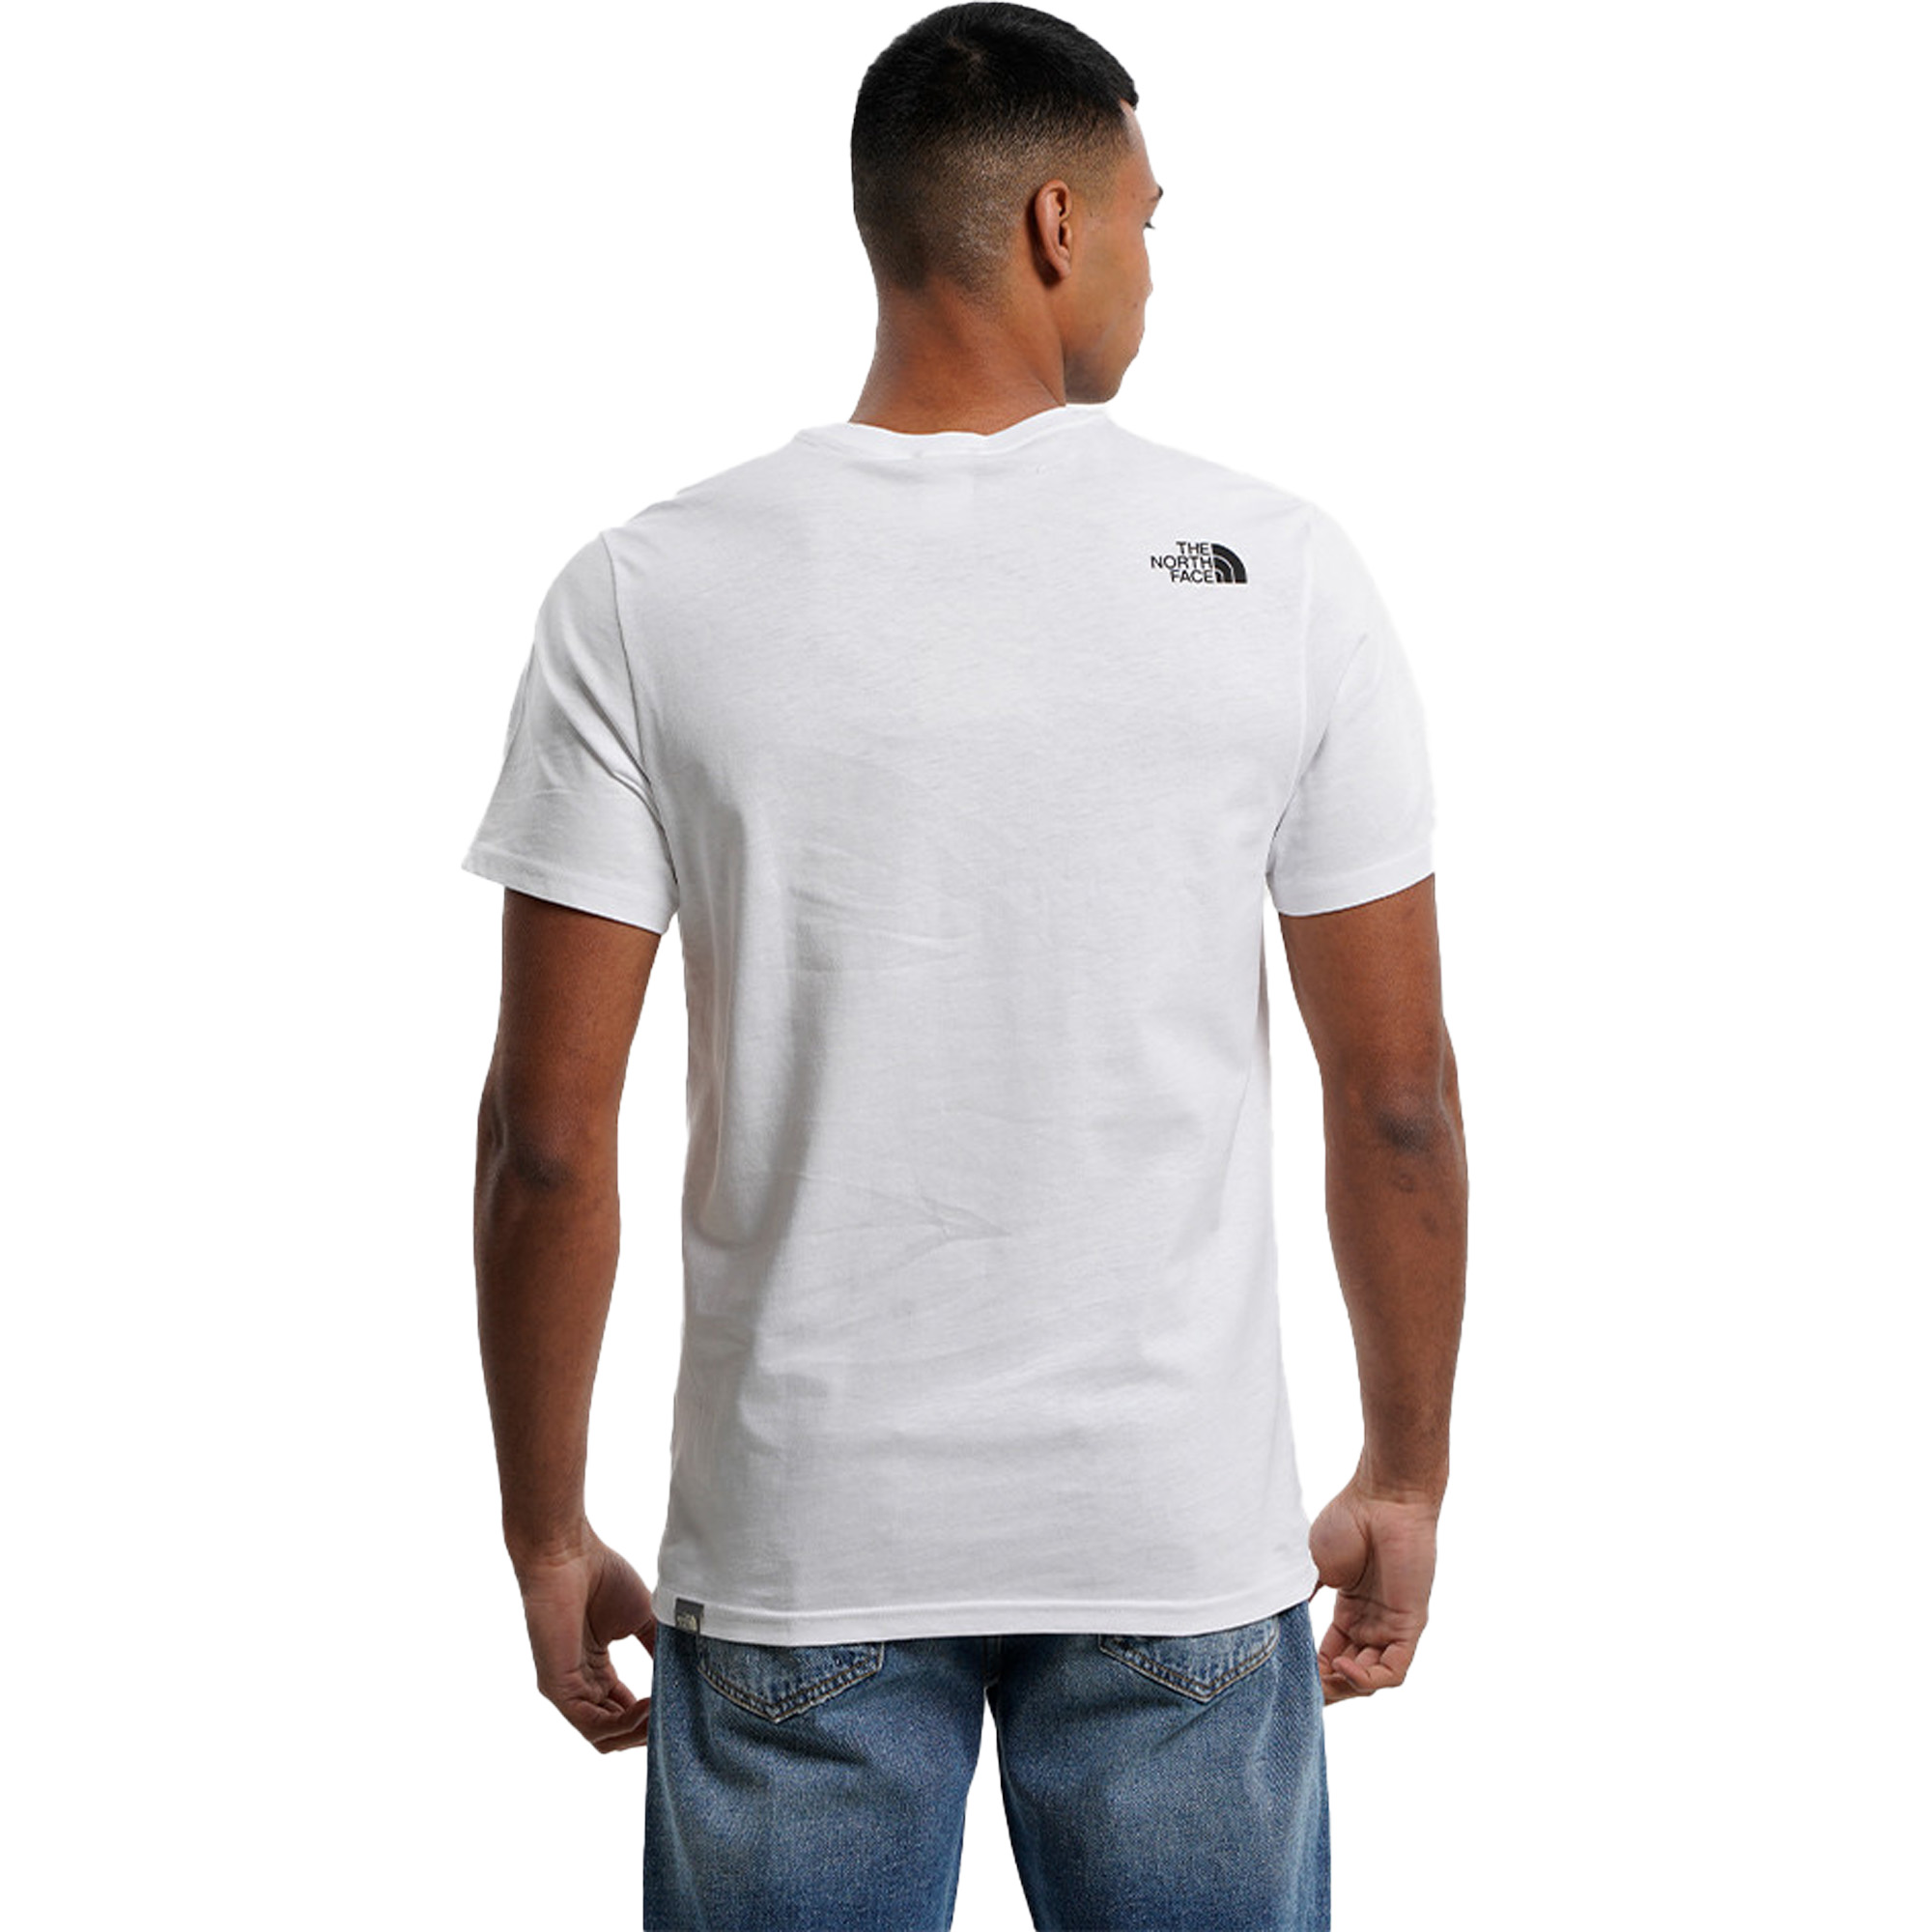 The North Face Mountain Line Tee Crew Neck T-shirt